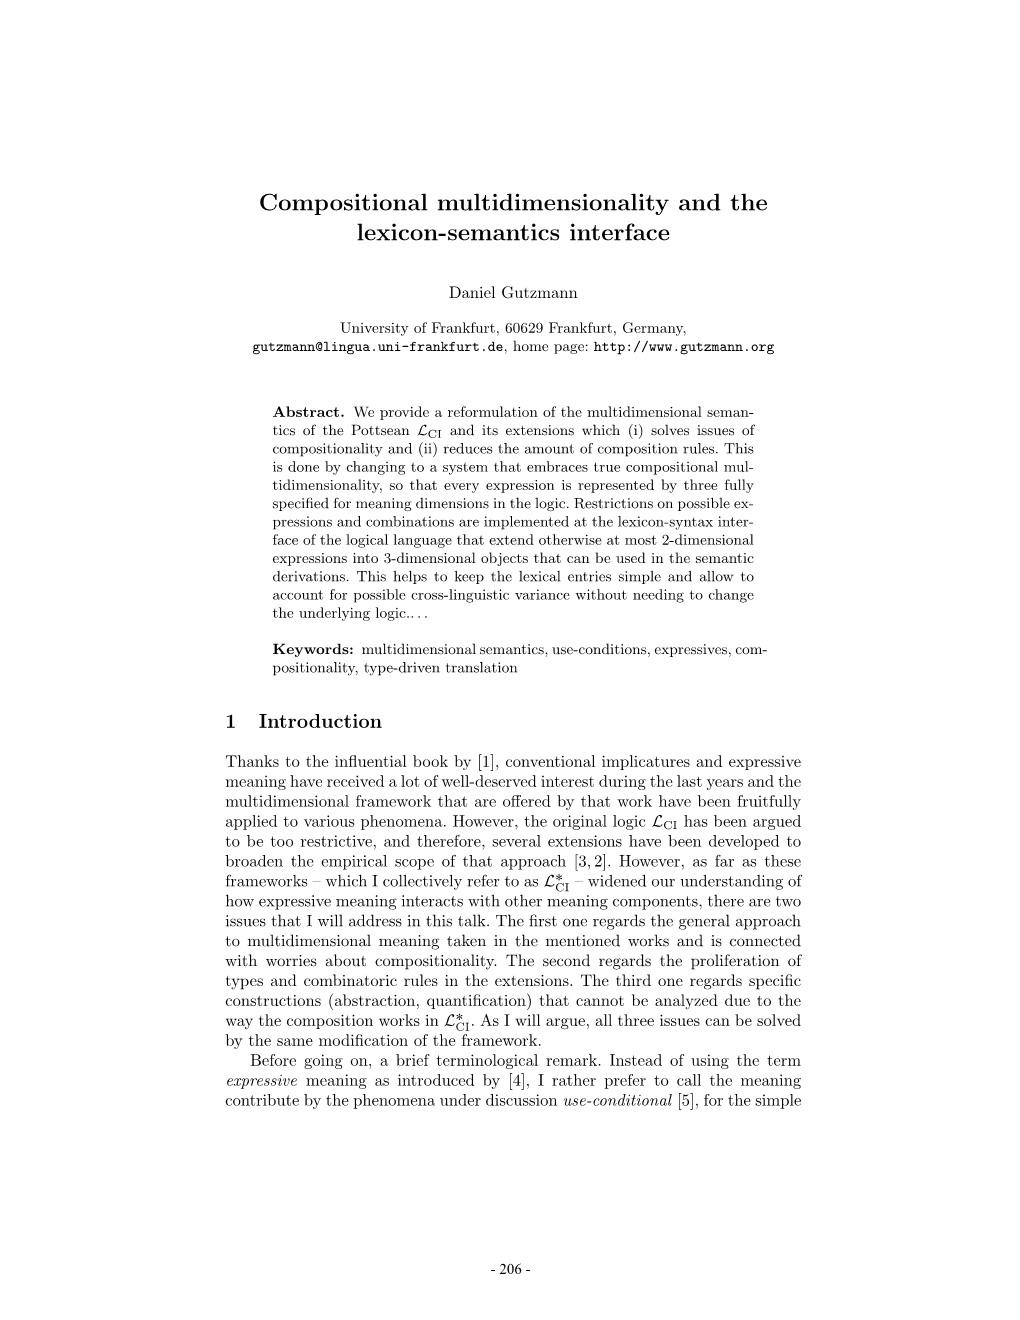 Compositional Multidimensionality and the Lexicon-Semantics Interface